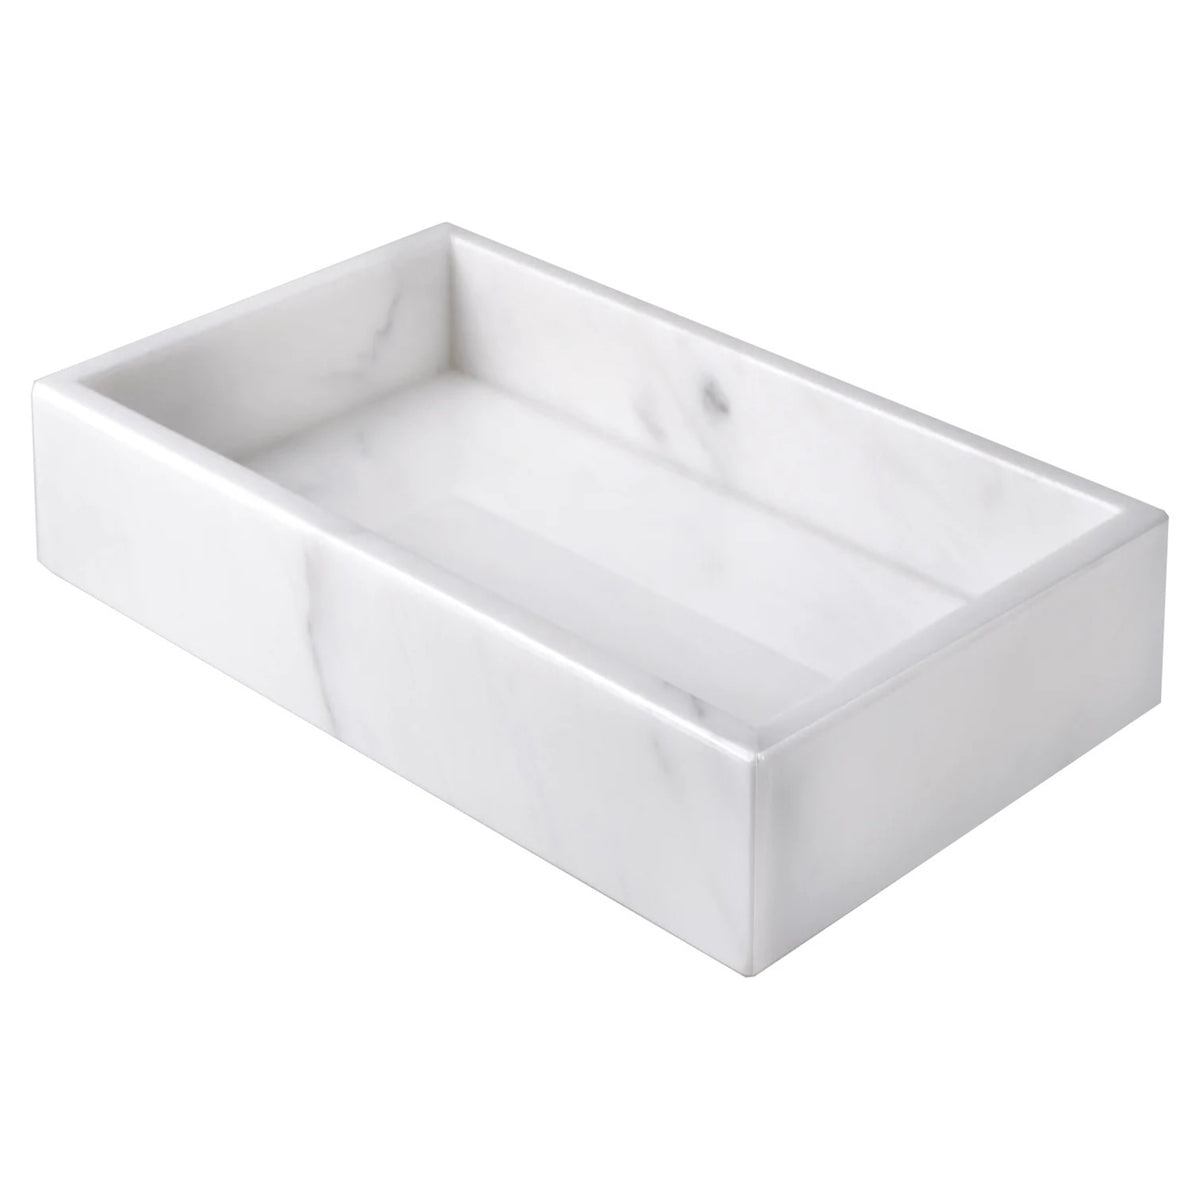 Mike and Ally Statuario Marble Bath Accessories Small Tray